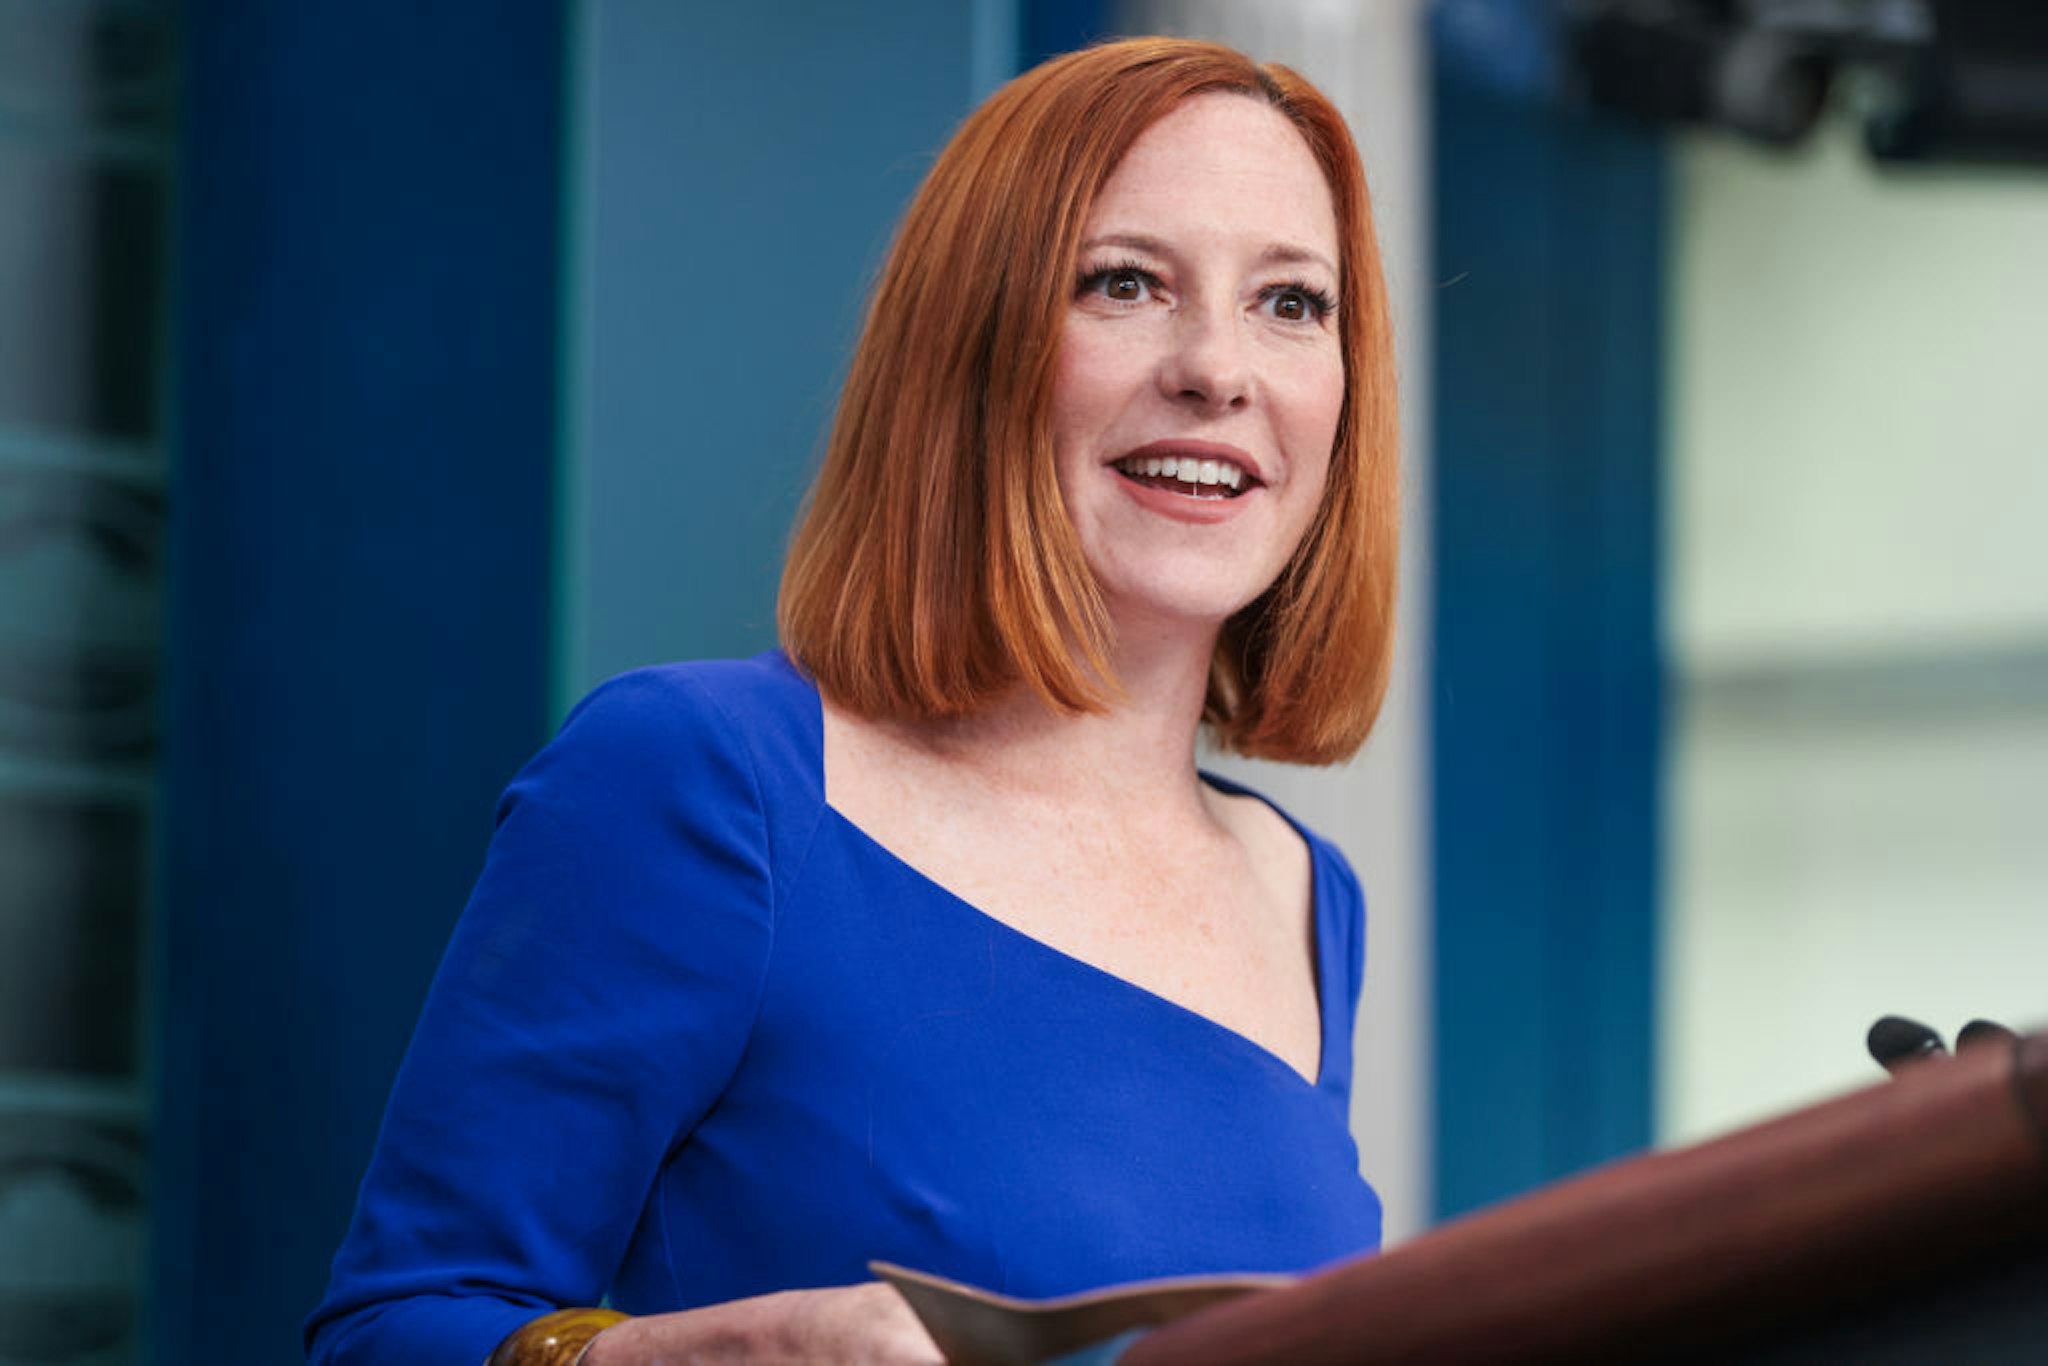 Jen Psaki, White House press secretary, during a news conference in the James S. Brady Press Briefing Room at the White House in Washington, D.C., U.S., on Friday, May 13, 2022. President Biden today is meeting with local elected officials and chiefs of police from cities that have benefited from using American Rescue Plan, according to the White House. Photographer: Oliver Contreras/Sipa/Bloomberg via Getty Images